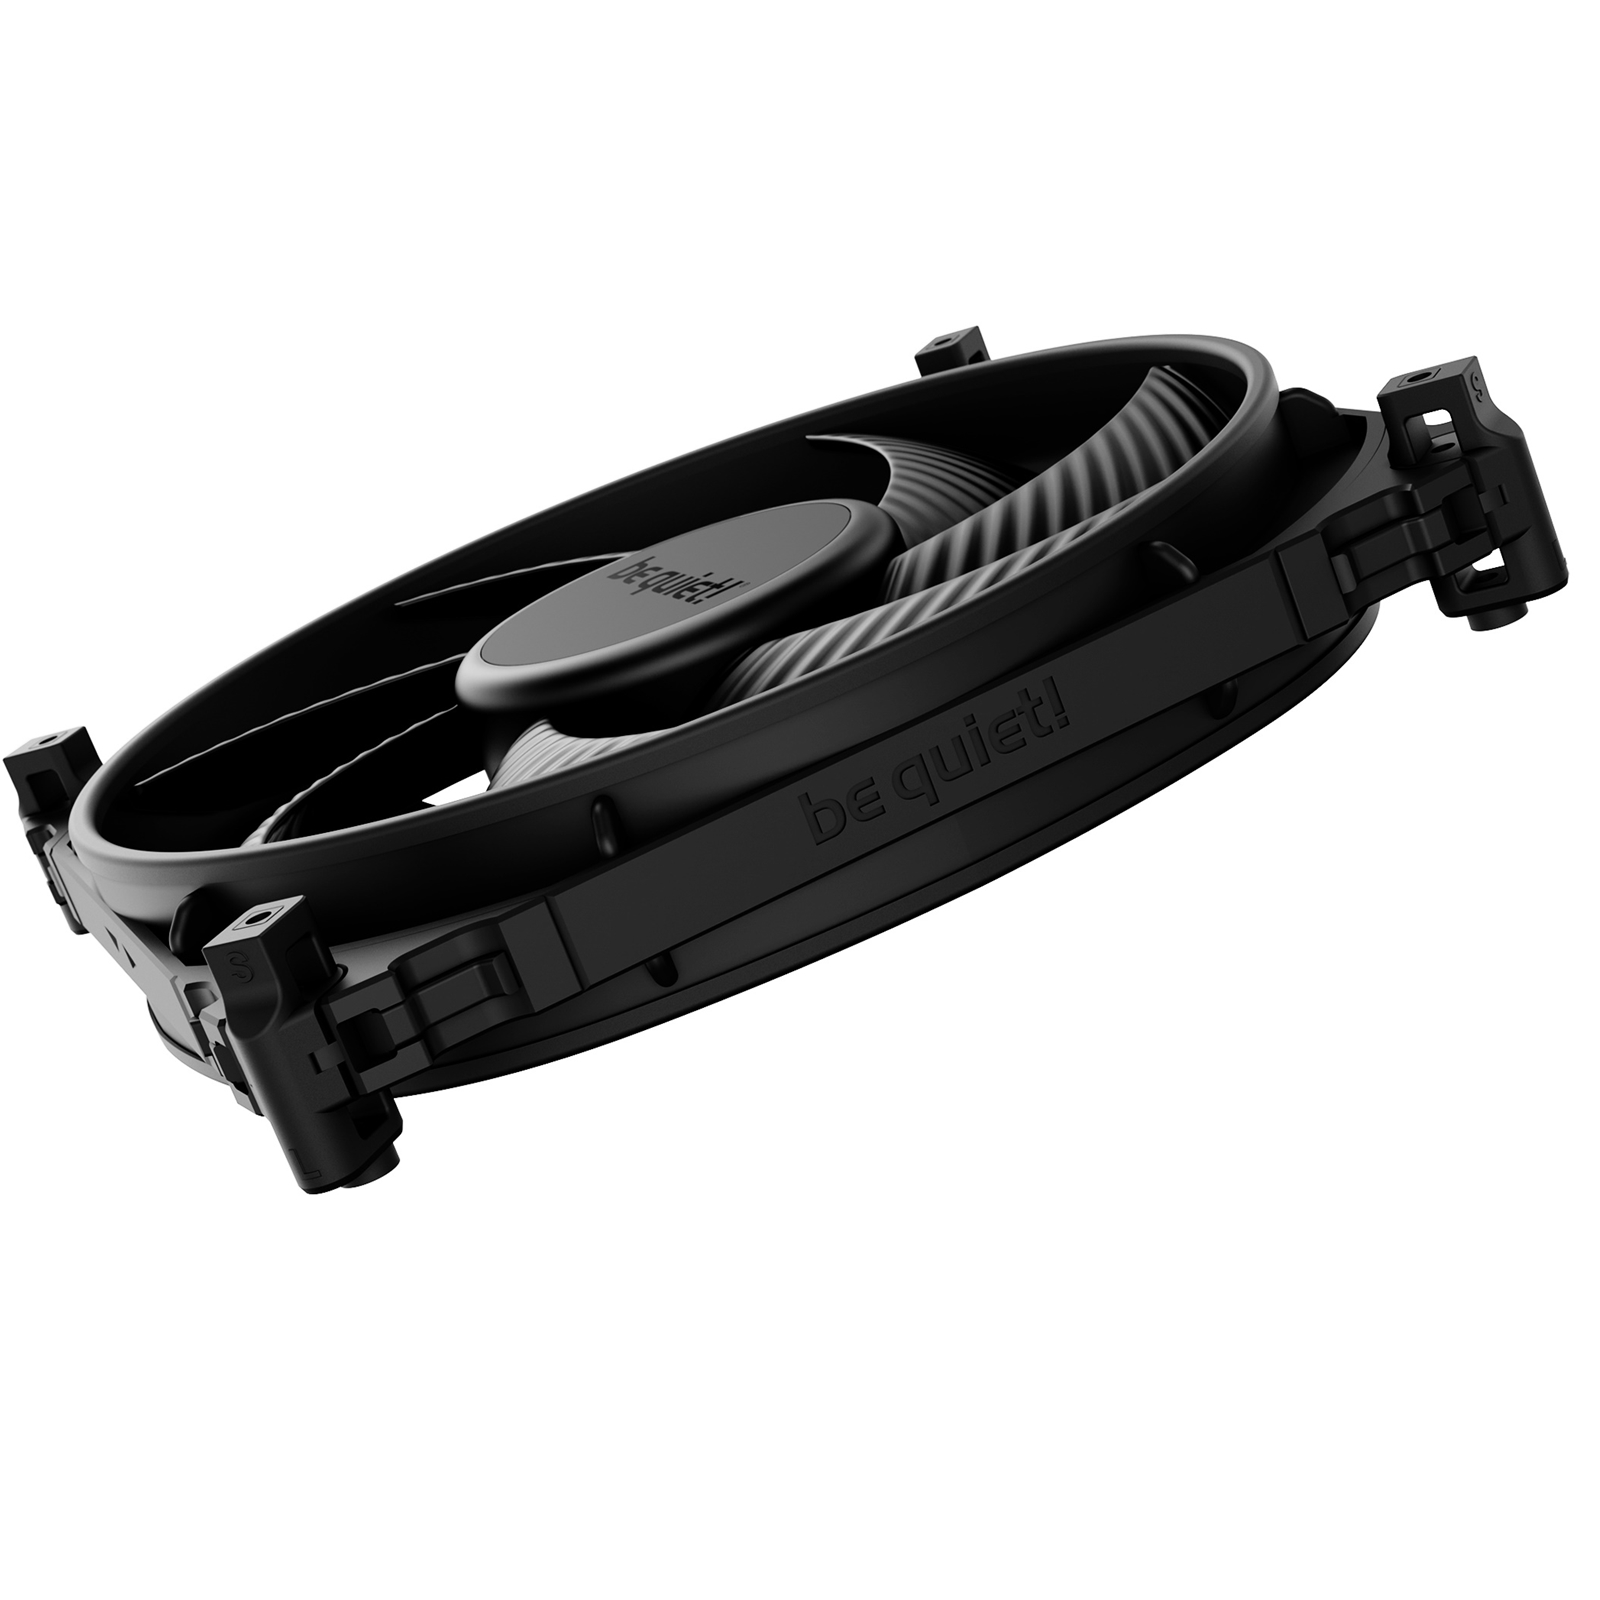 be quiet! Silent Wings 4 PWM High Speed Black Fan, 140mm, 1900RPM, 4-Pin PWM Fan Connector, Black Frame, Black Blades, Optimized Fan Blades for High End Performance, 2 Mounting Options